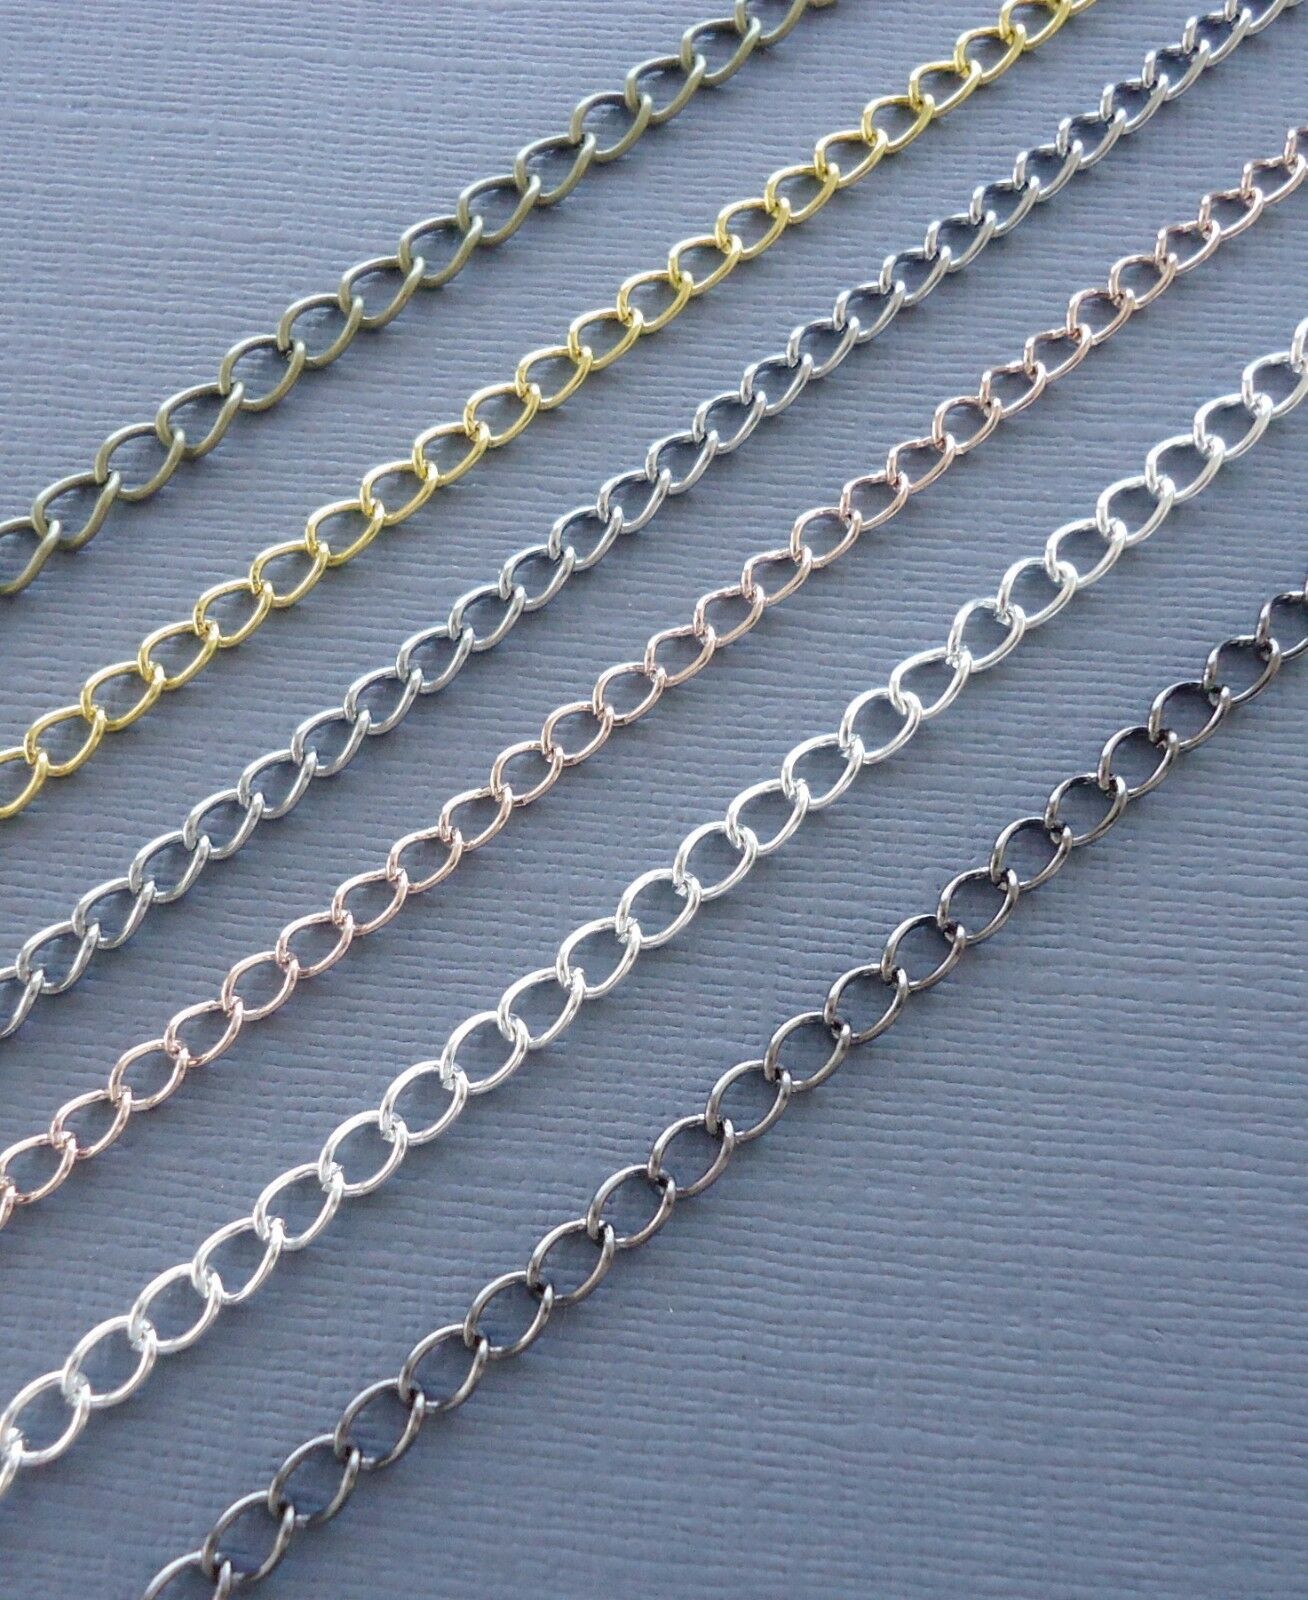 6ft Gold/silver/black Curb Cable Chains Link Opened Findings Jewelry Making Diy